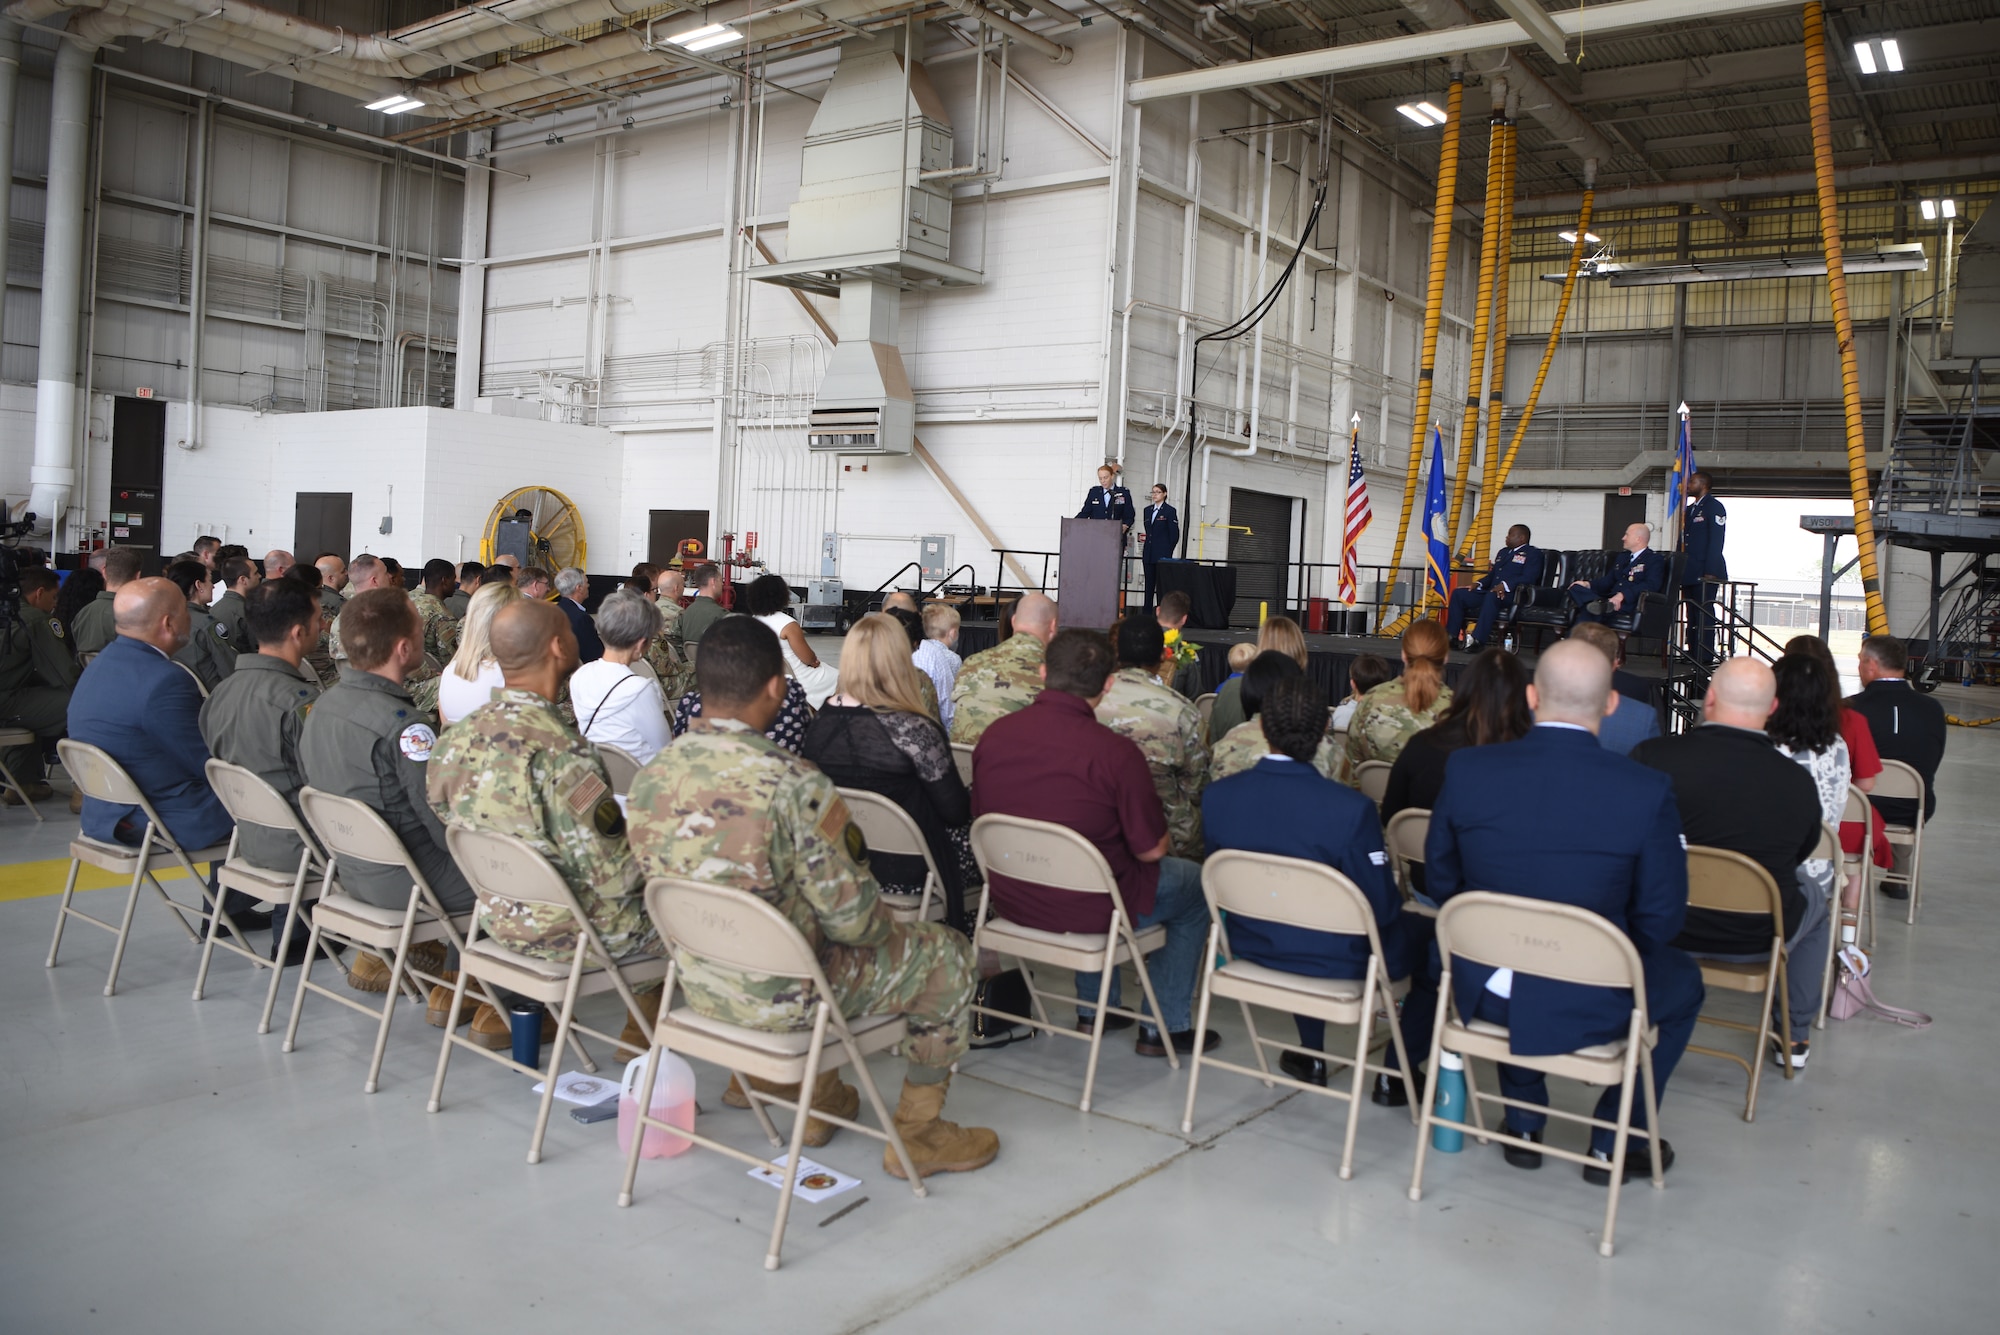 Dyess personnel attend the 28th Bomb Squadron change of command ceremony inside the Three Bay Hangar at Dyess Air Force Base, Texas, April 22, 2022. U.S. Air Force Lt. Col. Scott Thompson relinquished command of the 28th BS to Lt. Col. Kristen Jenkins. As commander, Jenkins will be in charge of determining, evaluating and implementing formal training requirements to qualify crewmembers in long-range day and night, all-weather and air-to-ground attack missions. (U.S. Air Force photo by Staff Sgt. Holly Cook)